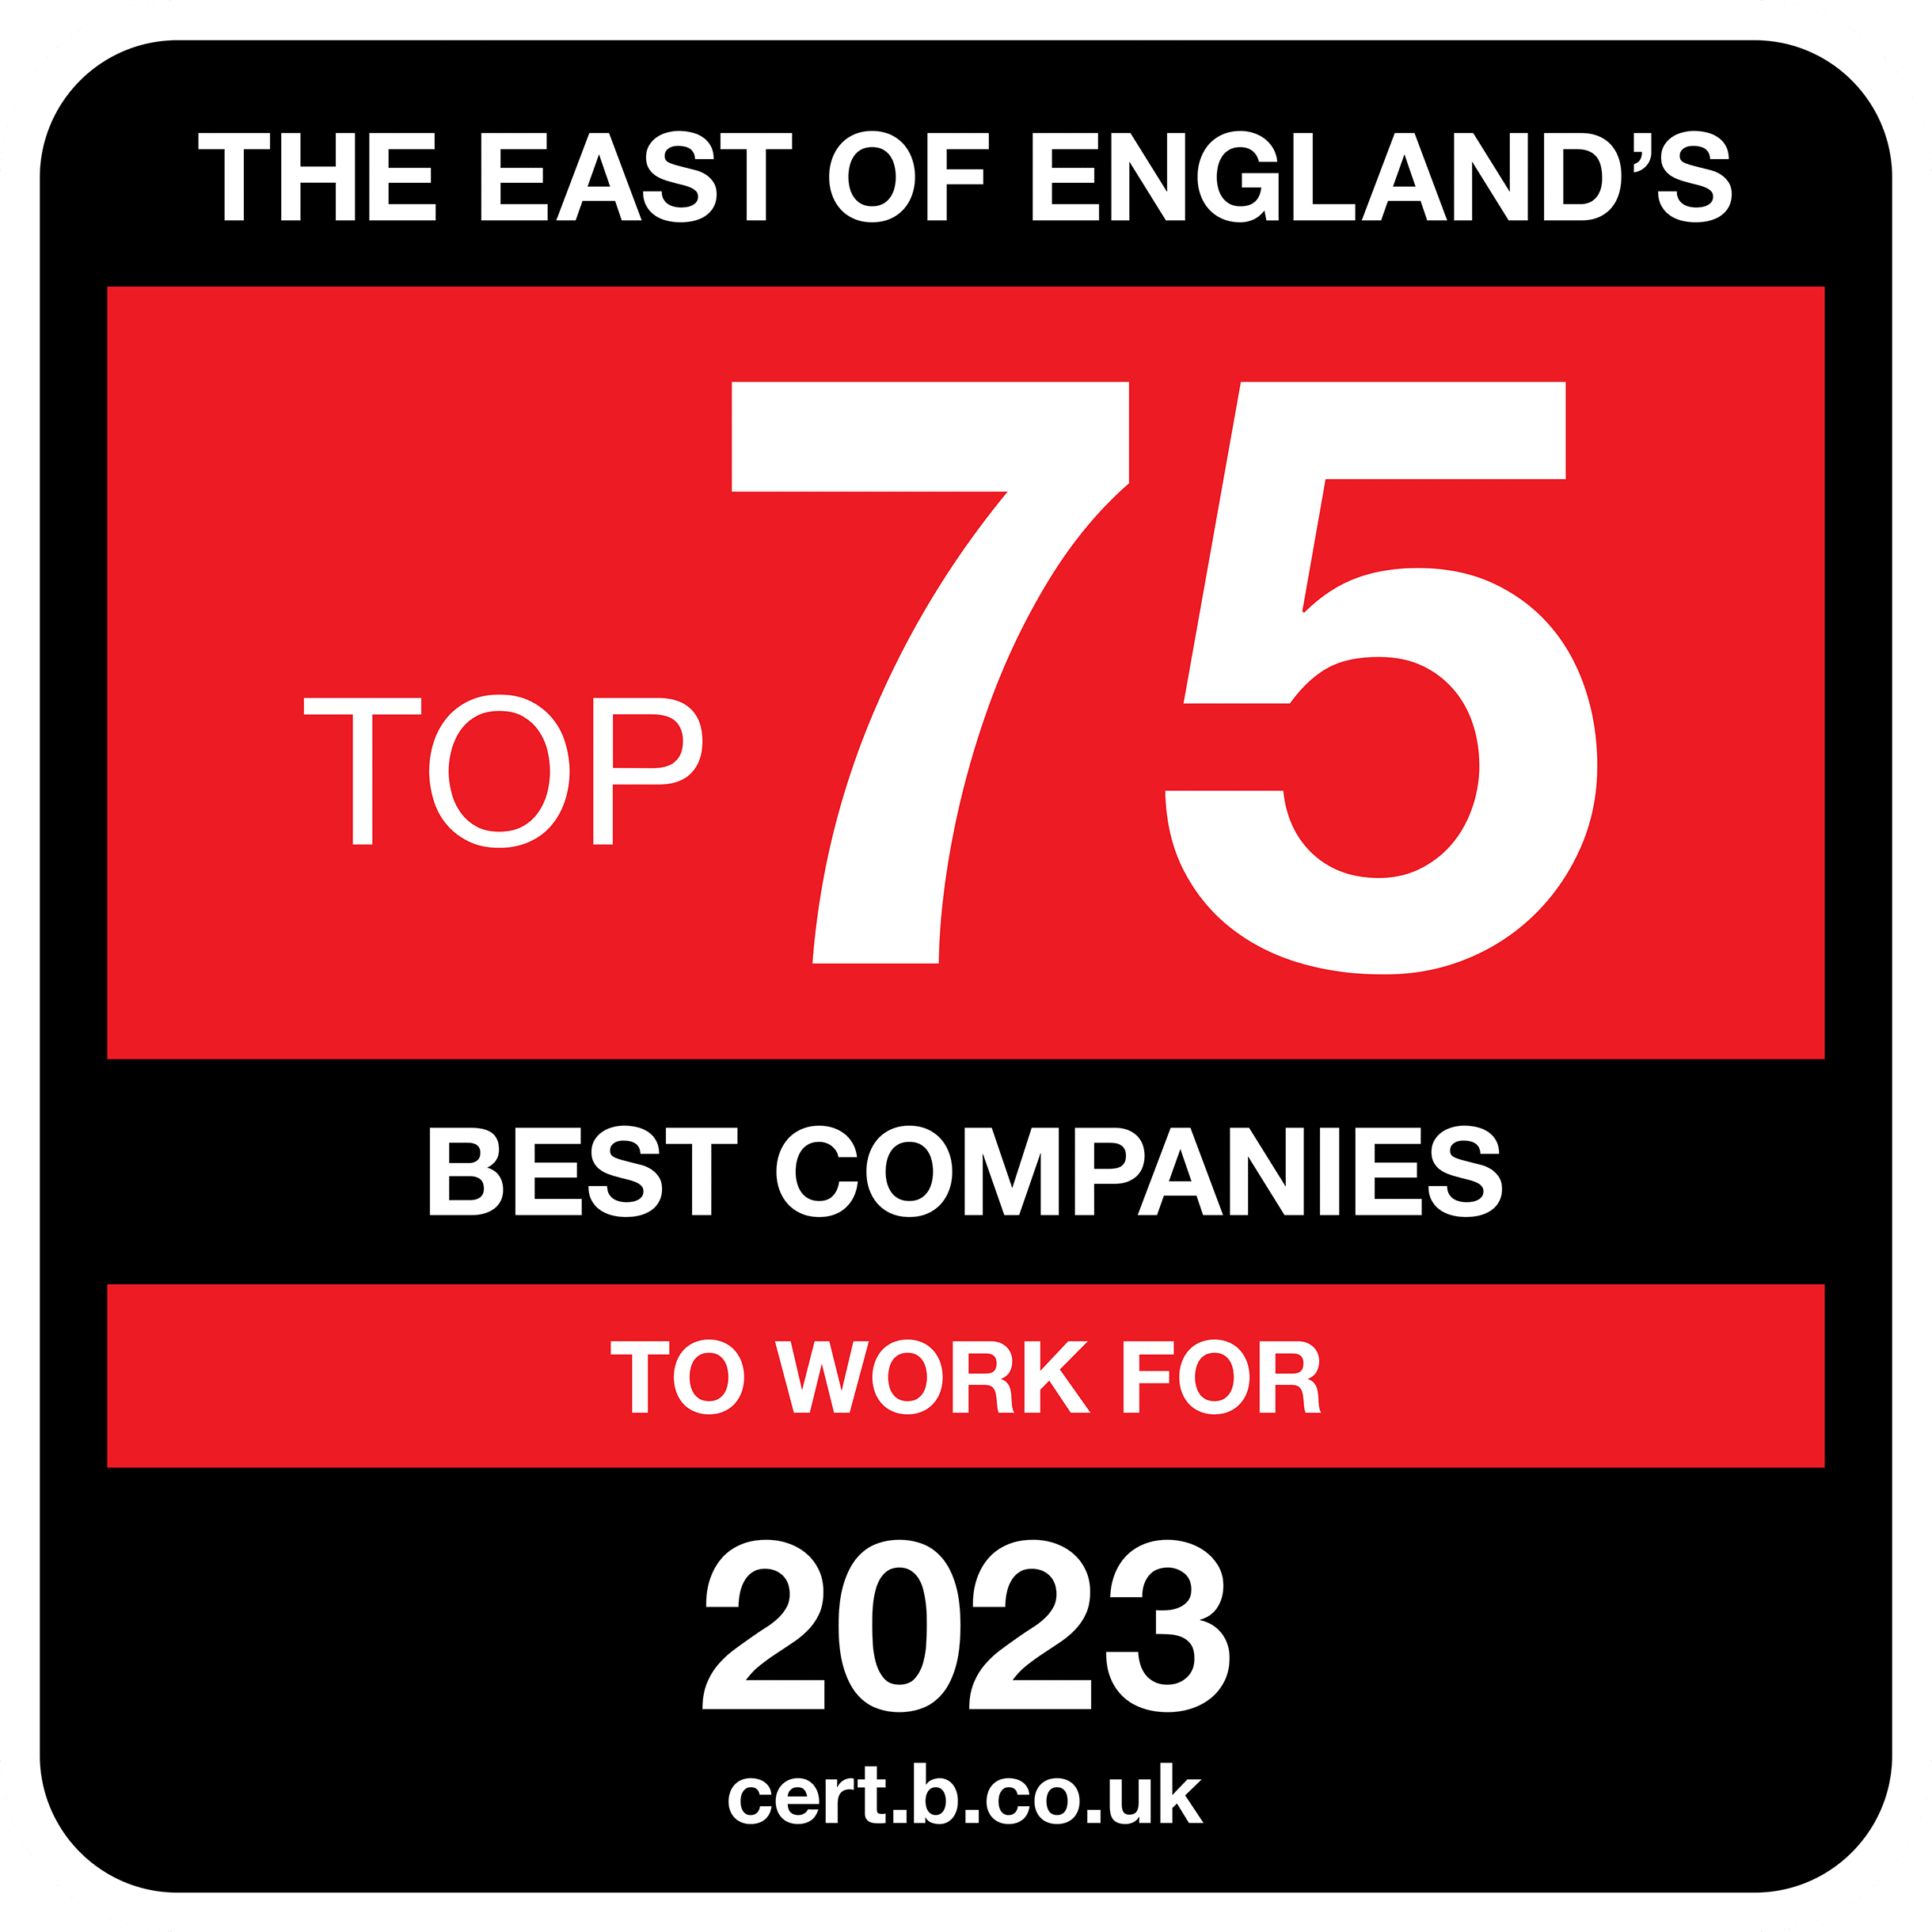 The East of England's Top 75 Best Companies to work for 2023